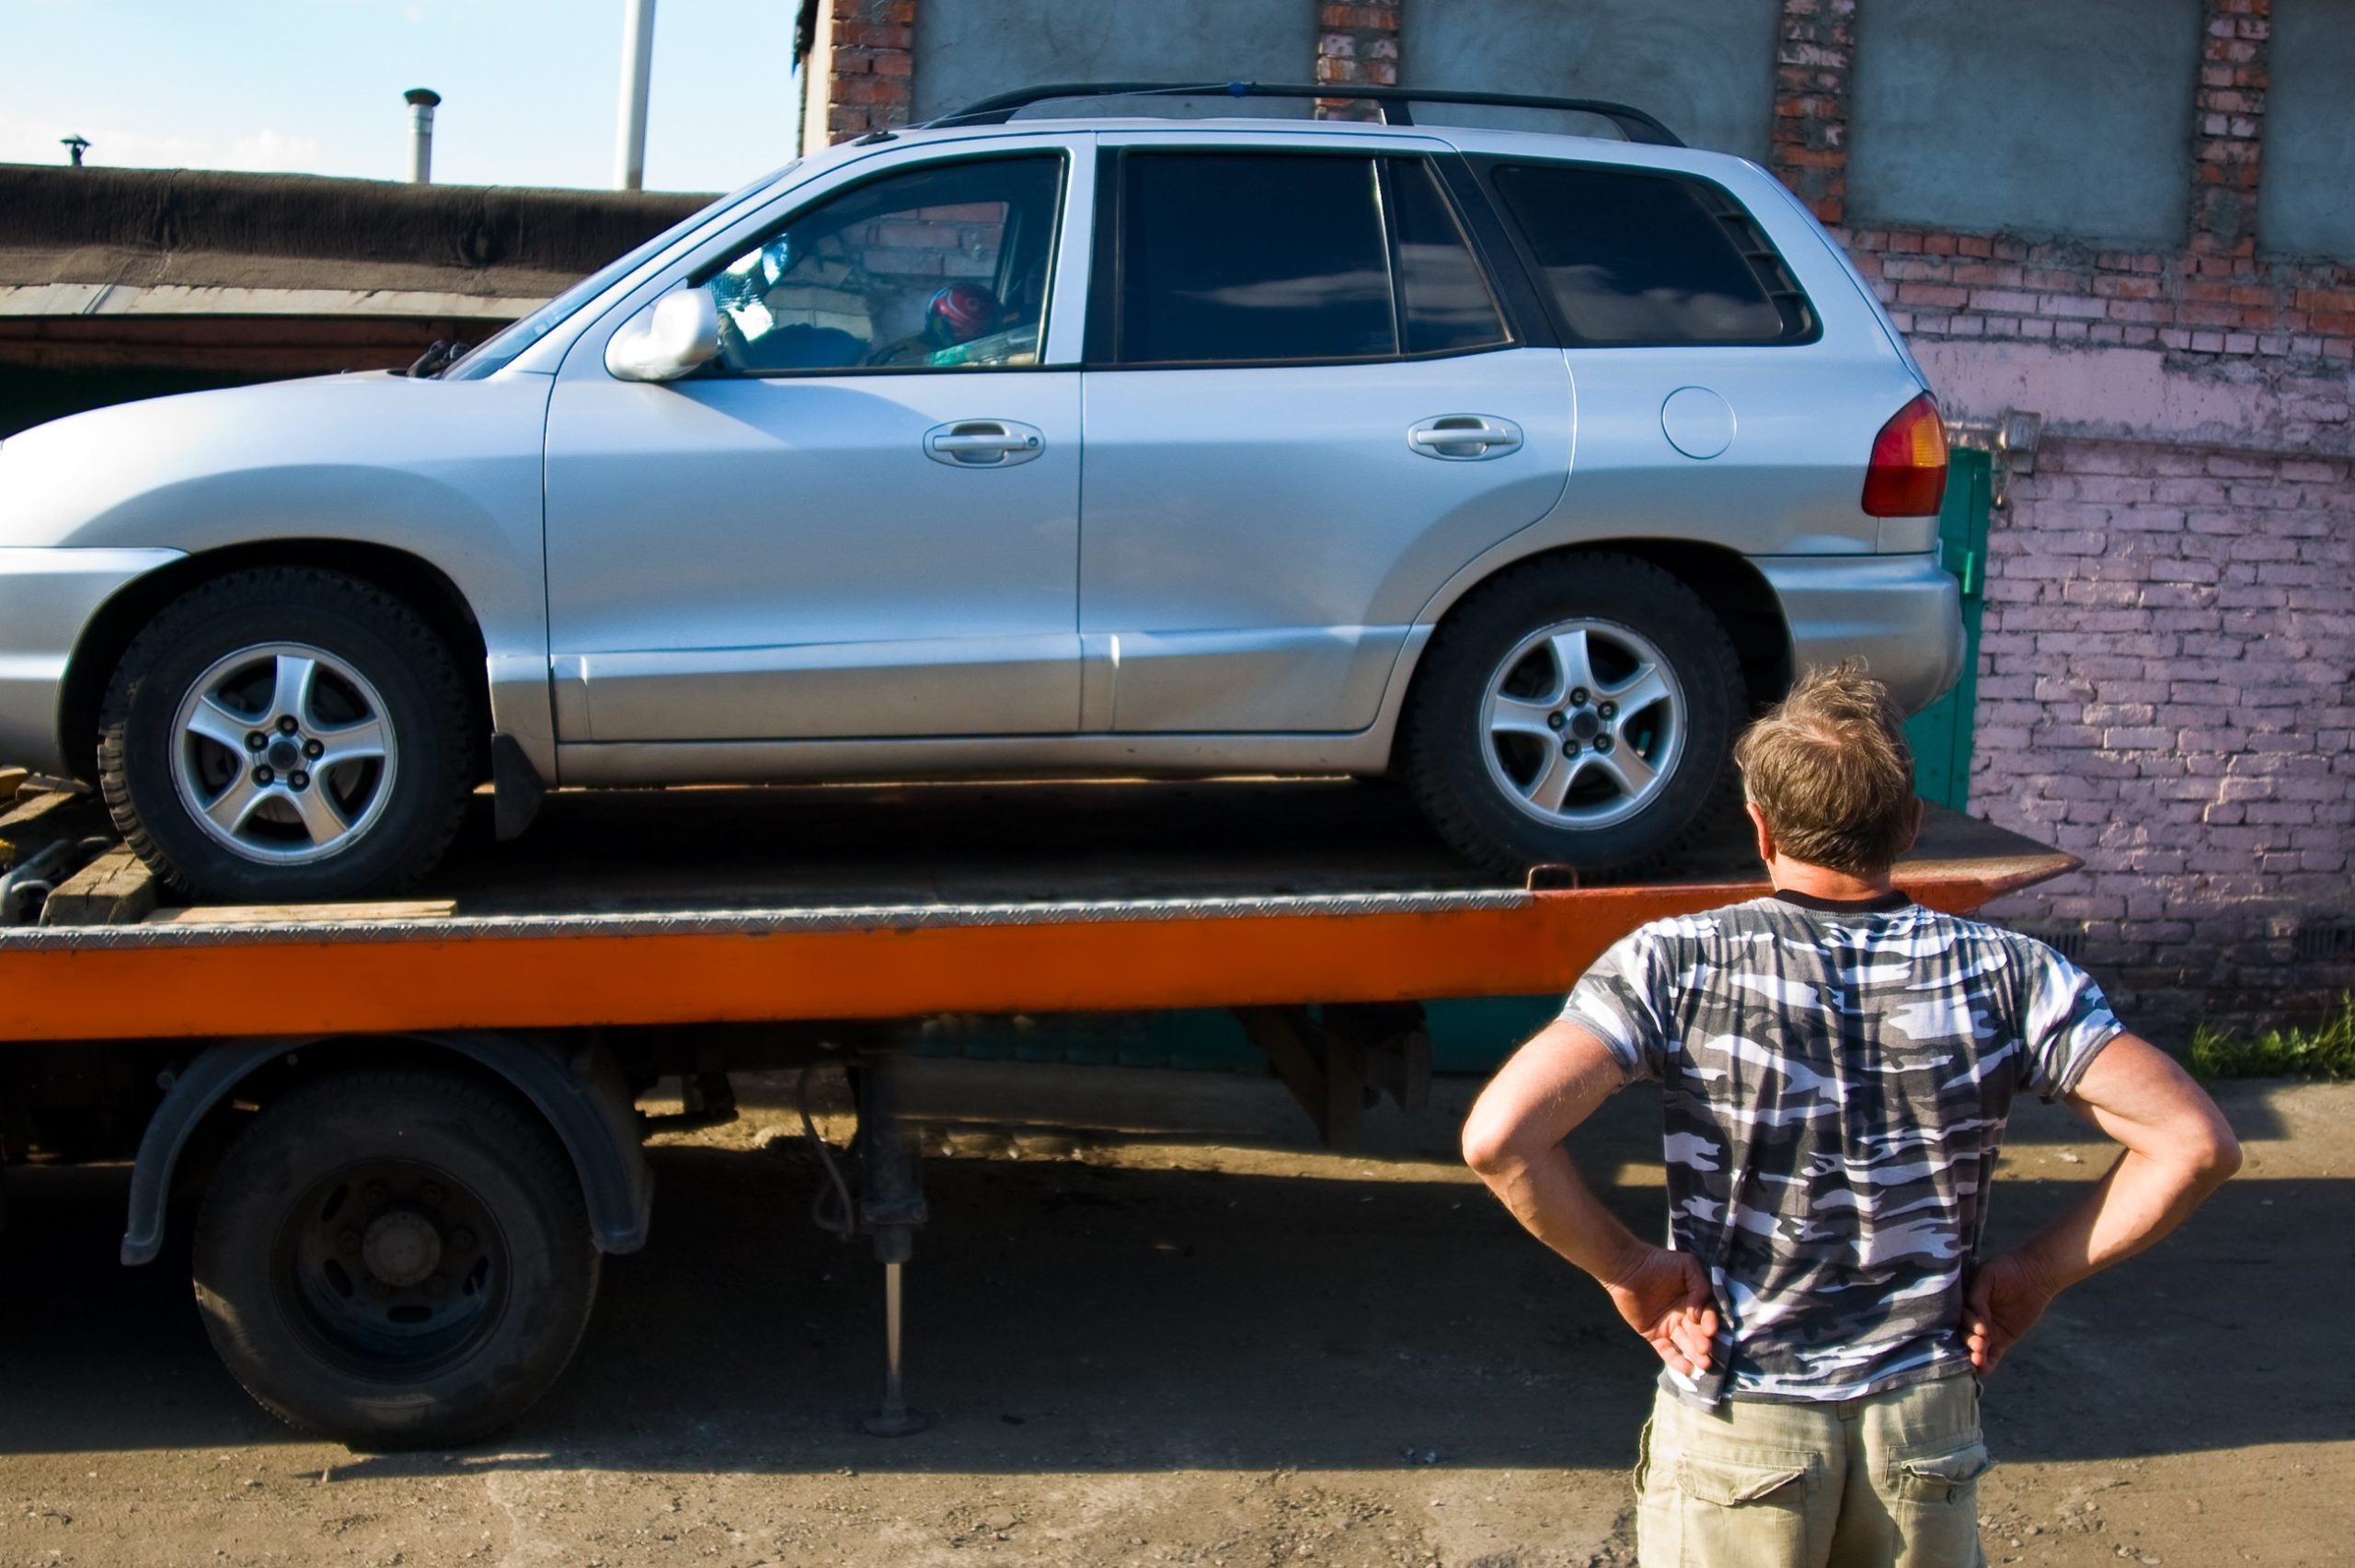 Will car insurance cover towing?